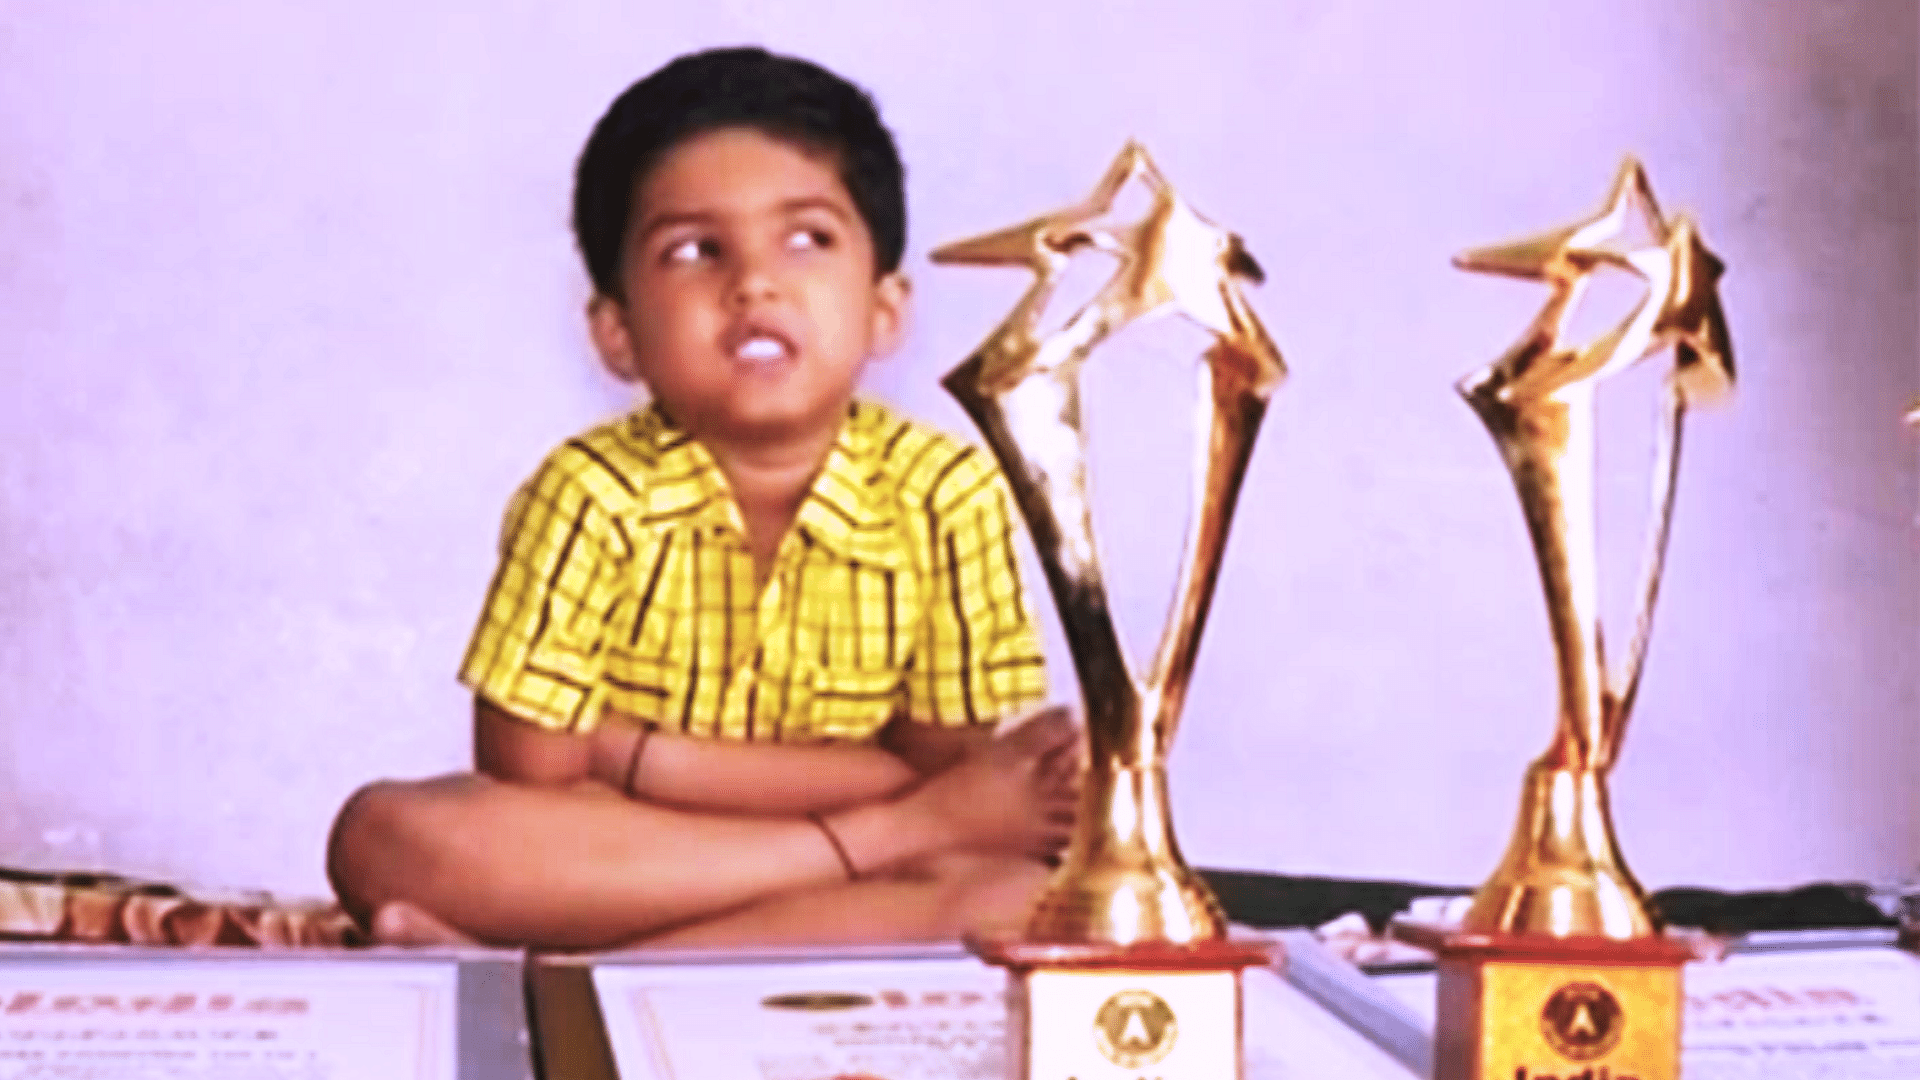 Four-year-old Varad Malkhandale already has 3 national records in his name. (Photo: ANI Screengrab)